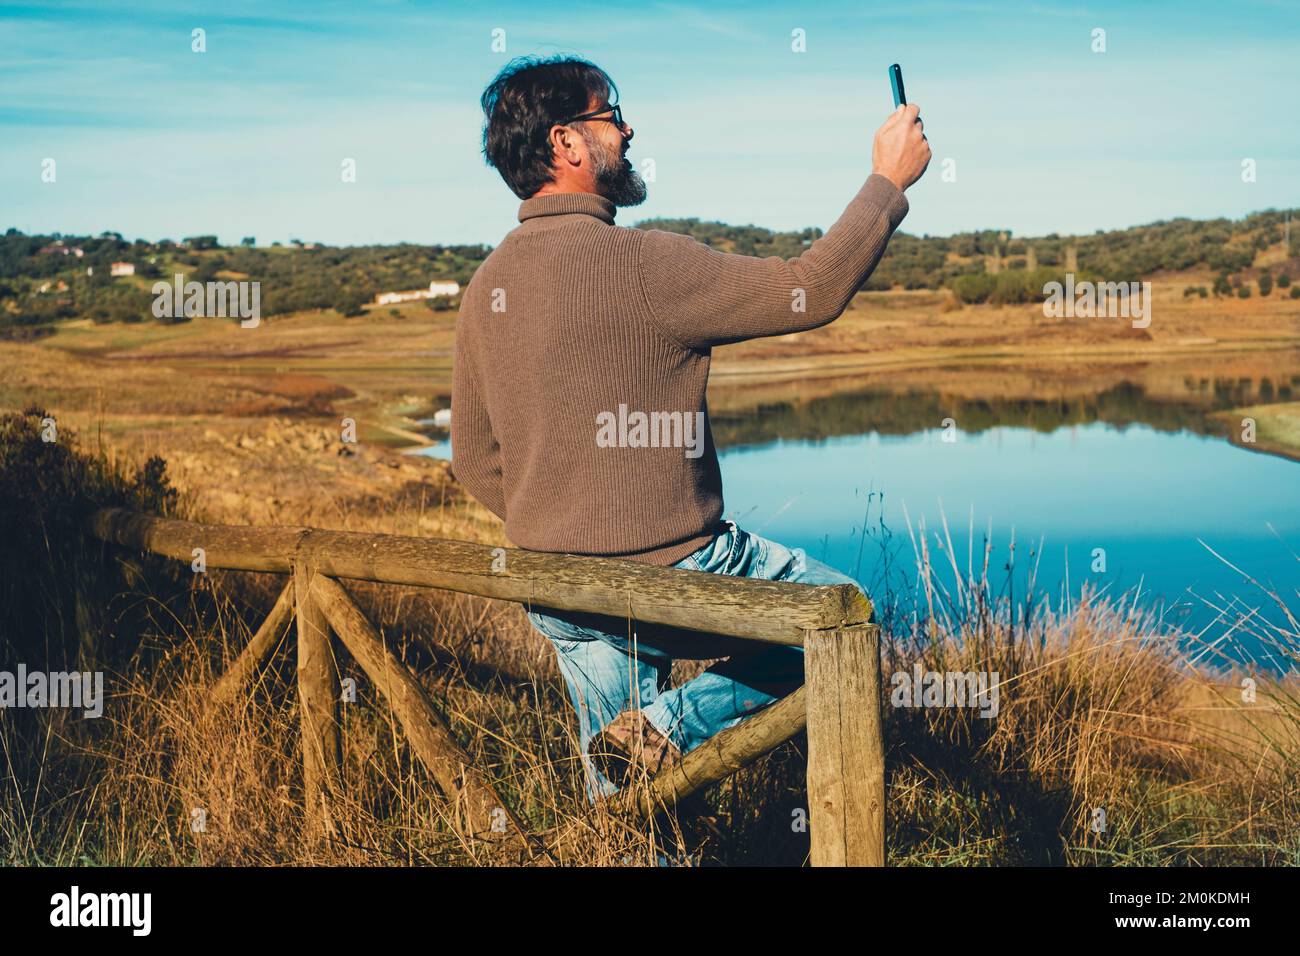 One male tourist take landscape picture using mobile phone with lake view. One man enjoying outdoor leisure activity at the park and stay connected wi Stock Photo